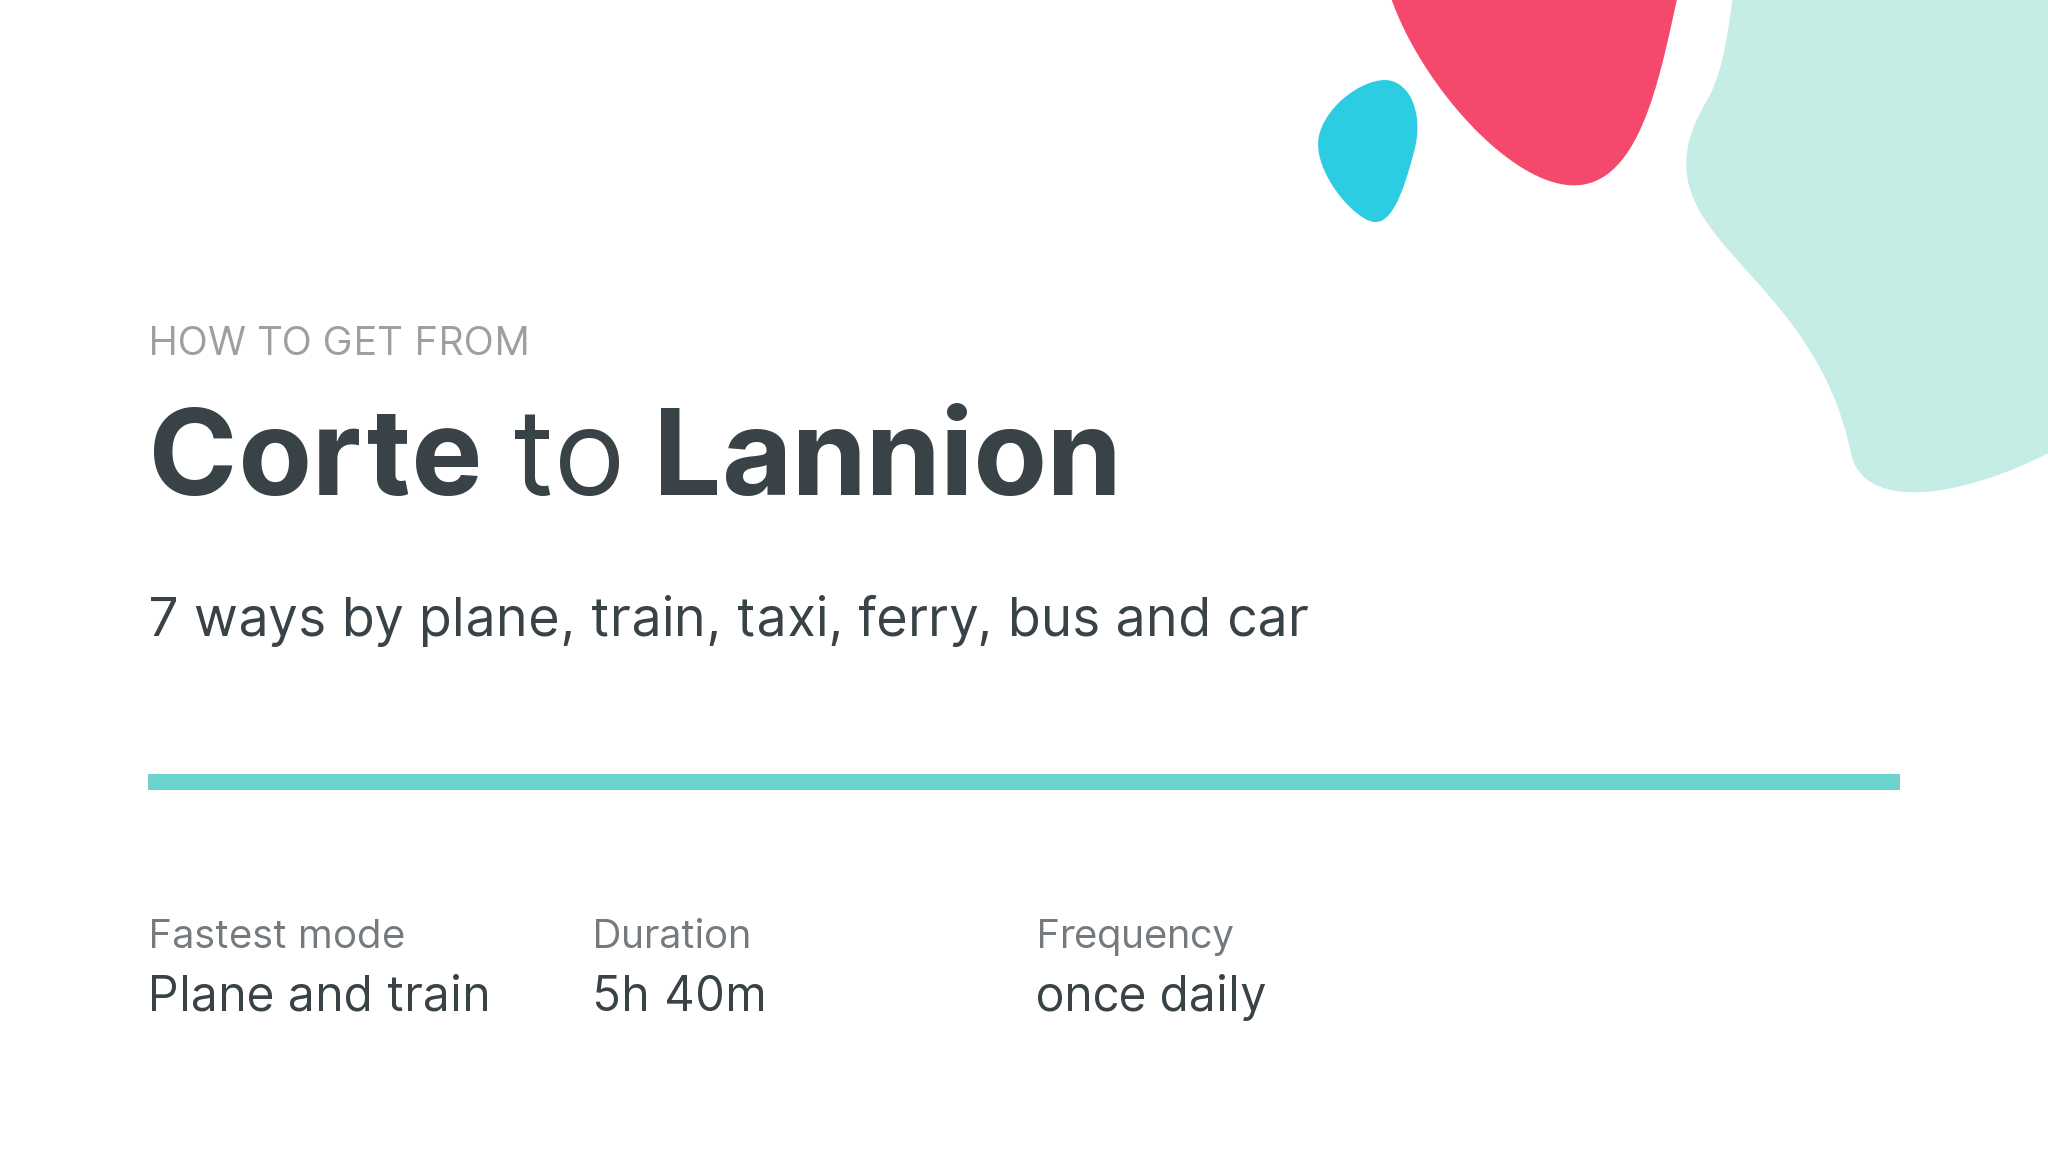 How do I get from Corte to Lannion